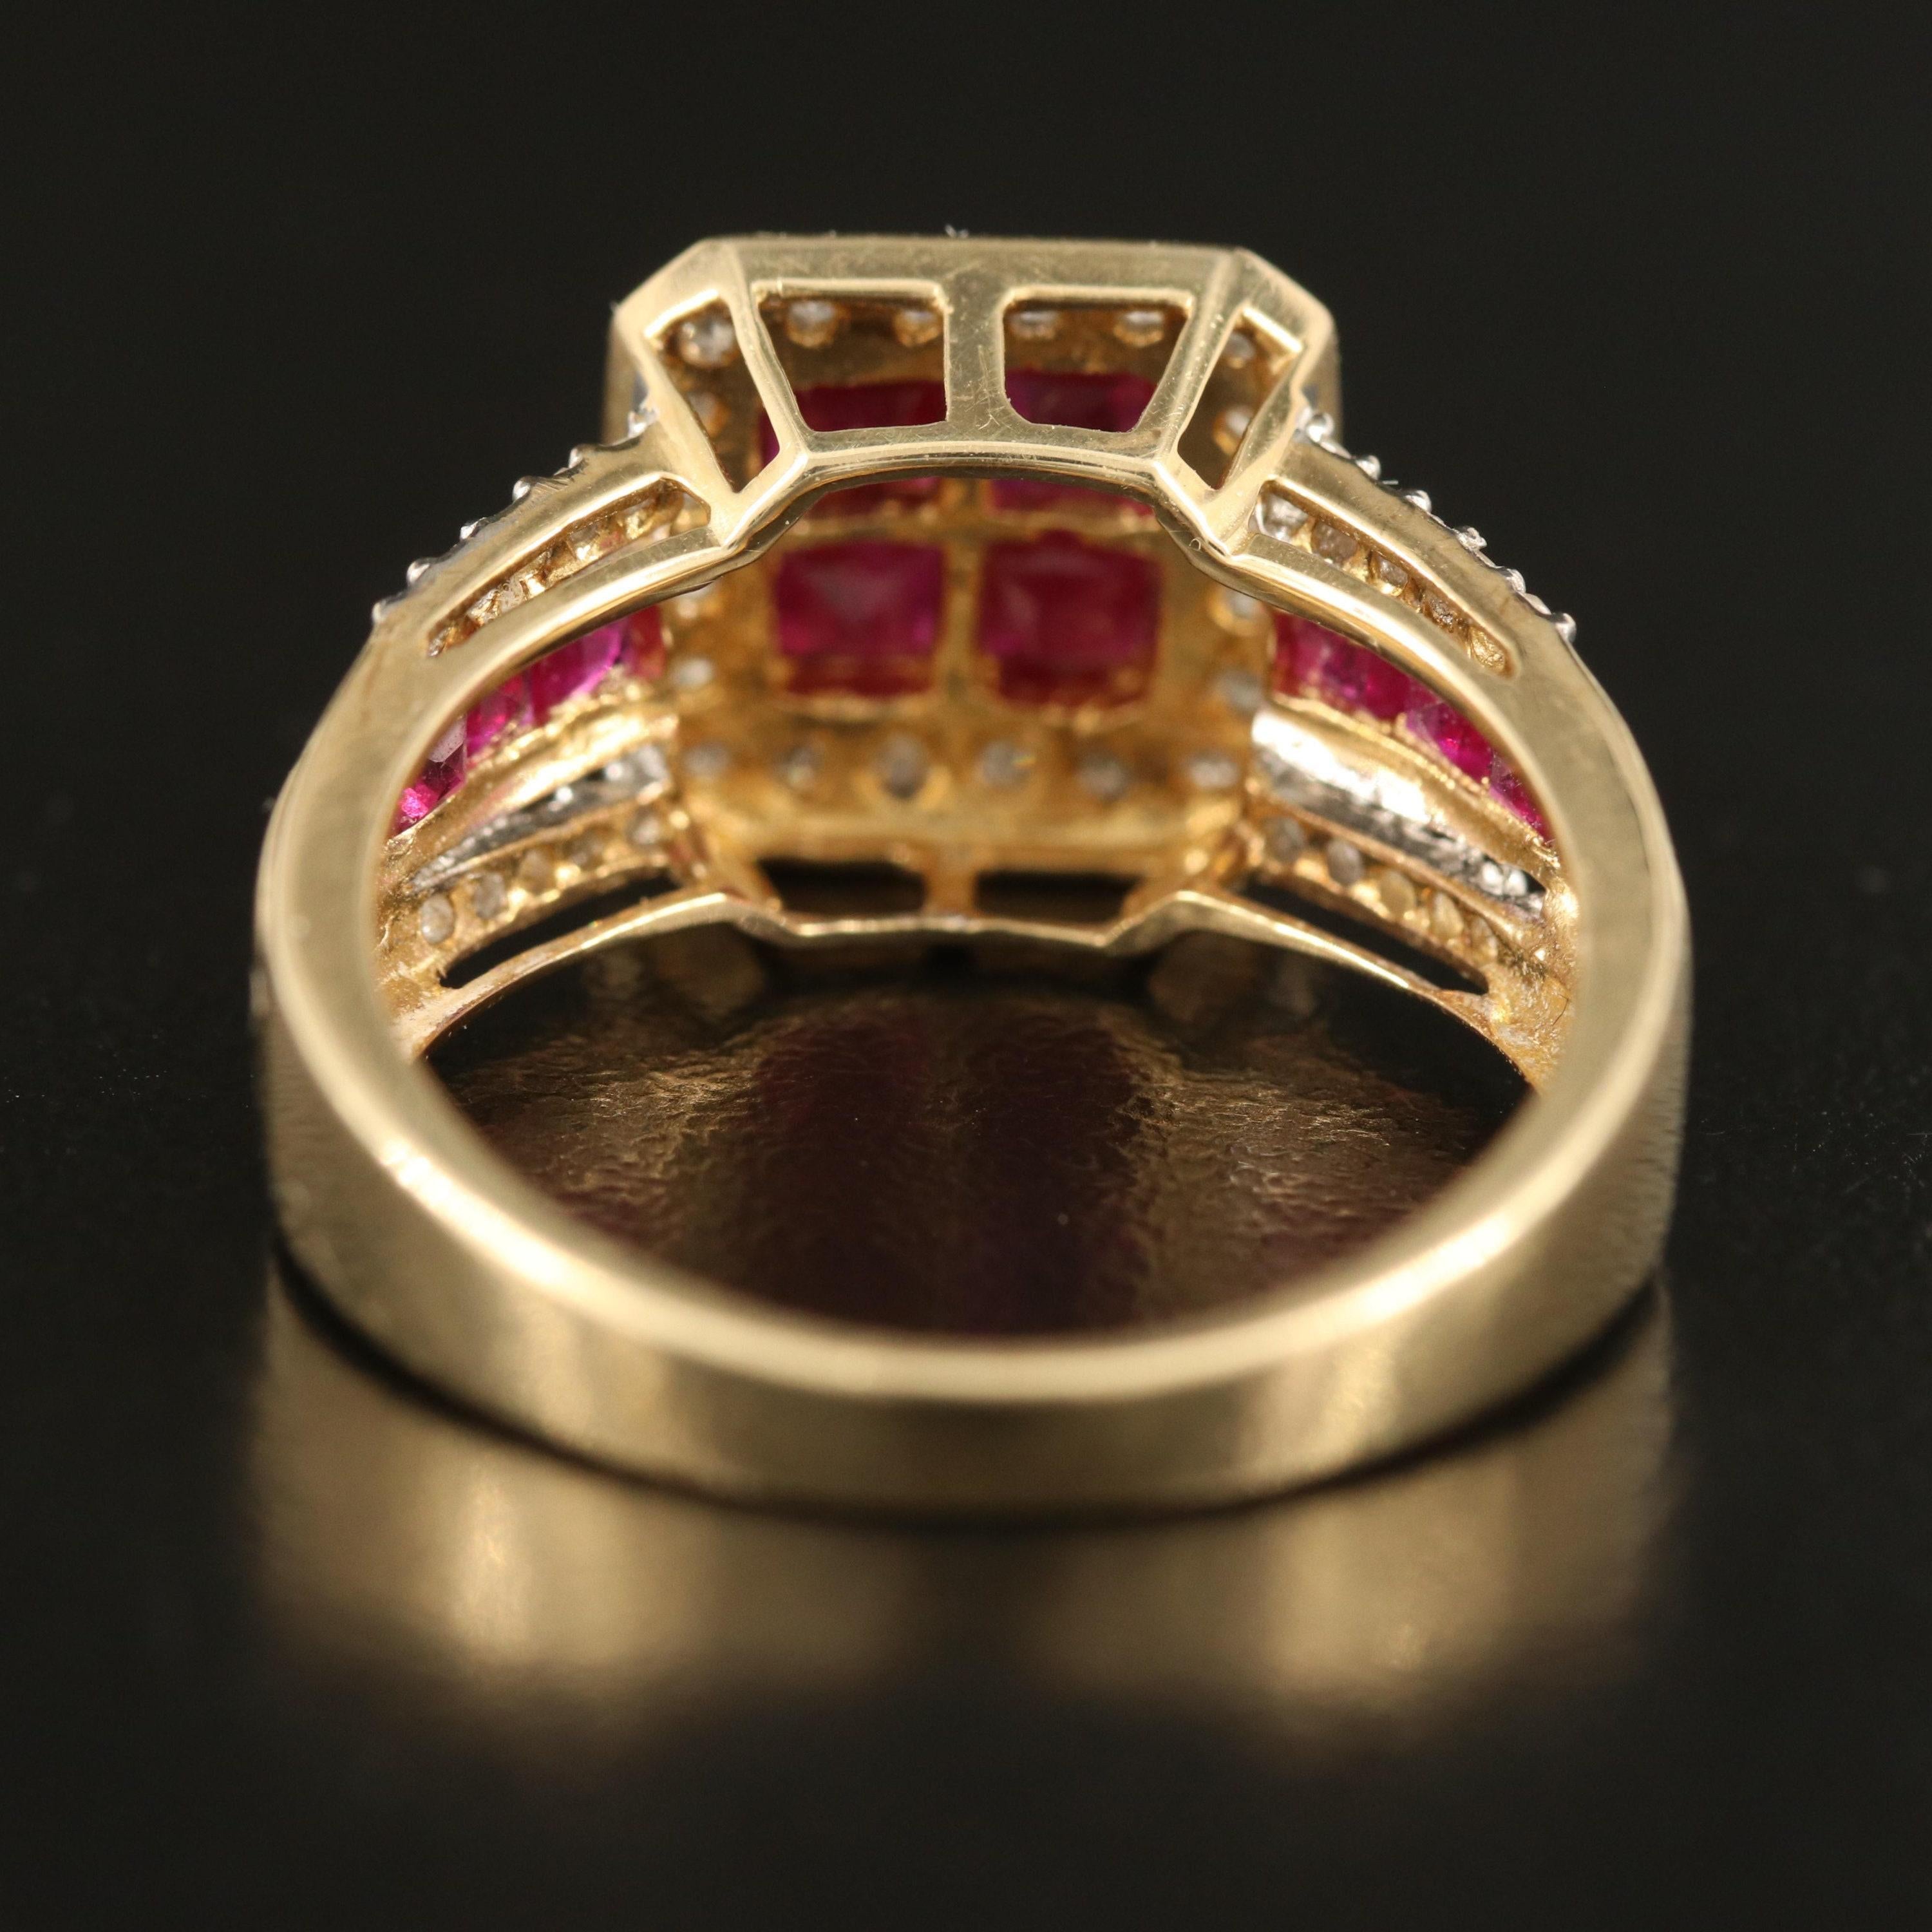 For Sale:  Art Deco Natural Ruby Diamond Engagement Ring Set in 18K Gold, Cocktail Ring 5